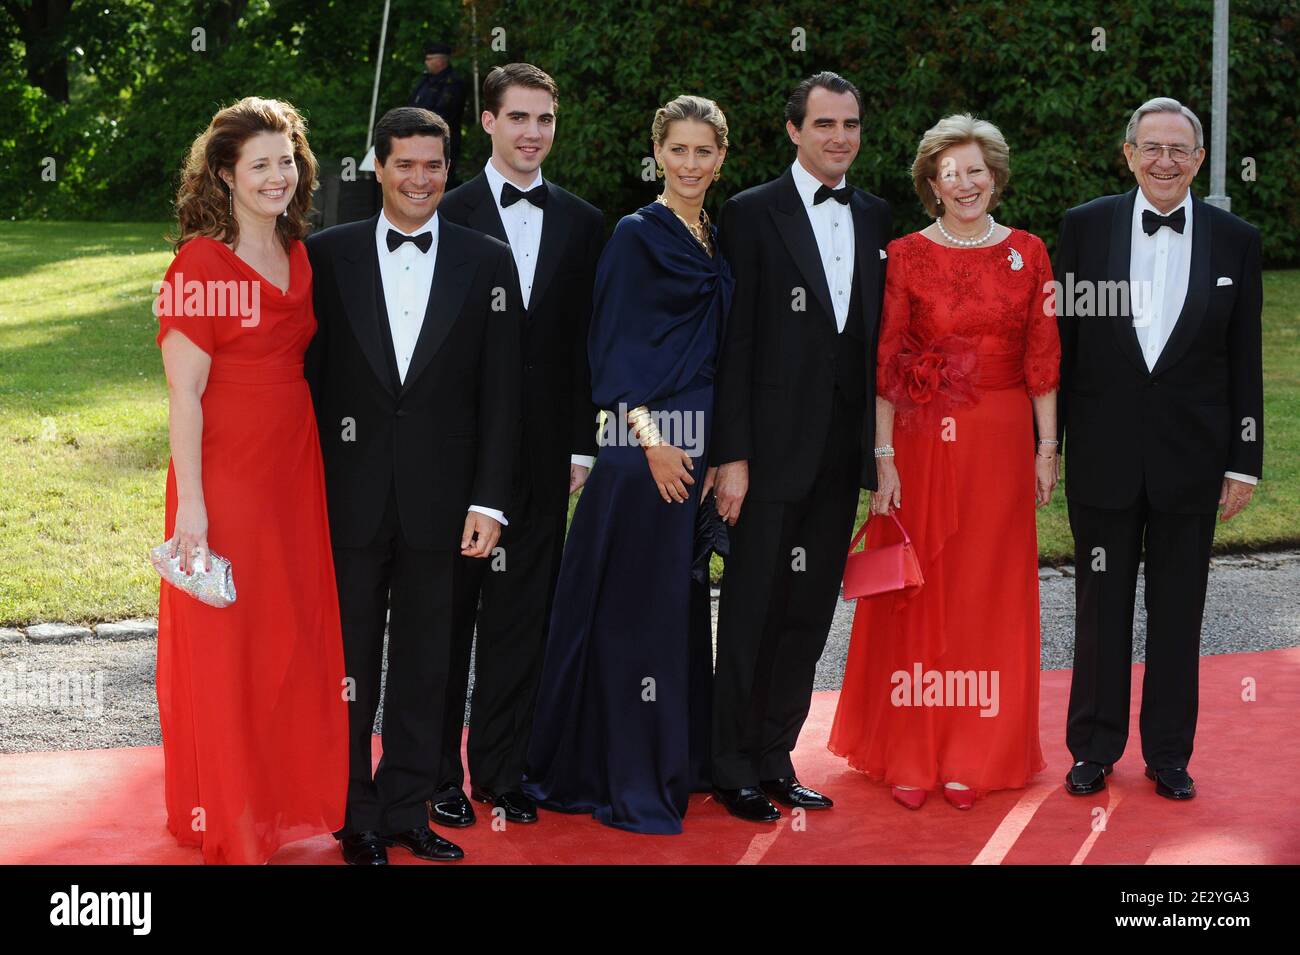 Princess Alexia Morales and husband Carlos Morales, Prince Philippos, Ms Tatiana Blatnik and Prince Nikolaos of Greece, Queen Anne-Marie and King Constantine of Greece arriving at the Swedish government dinner in honour of H.R.H. Crown Princess Victoria and Mr Daniel Westling held at the Eric Ericson hall in Stockholm, Sweden on June 18, 2010. Photo by Mousse-Nebinger-Orban/ABACAPRESS.COM Stock Photo